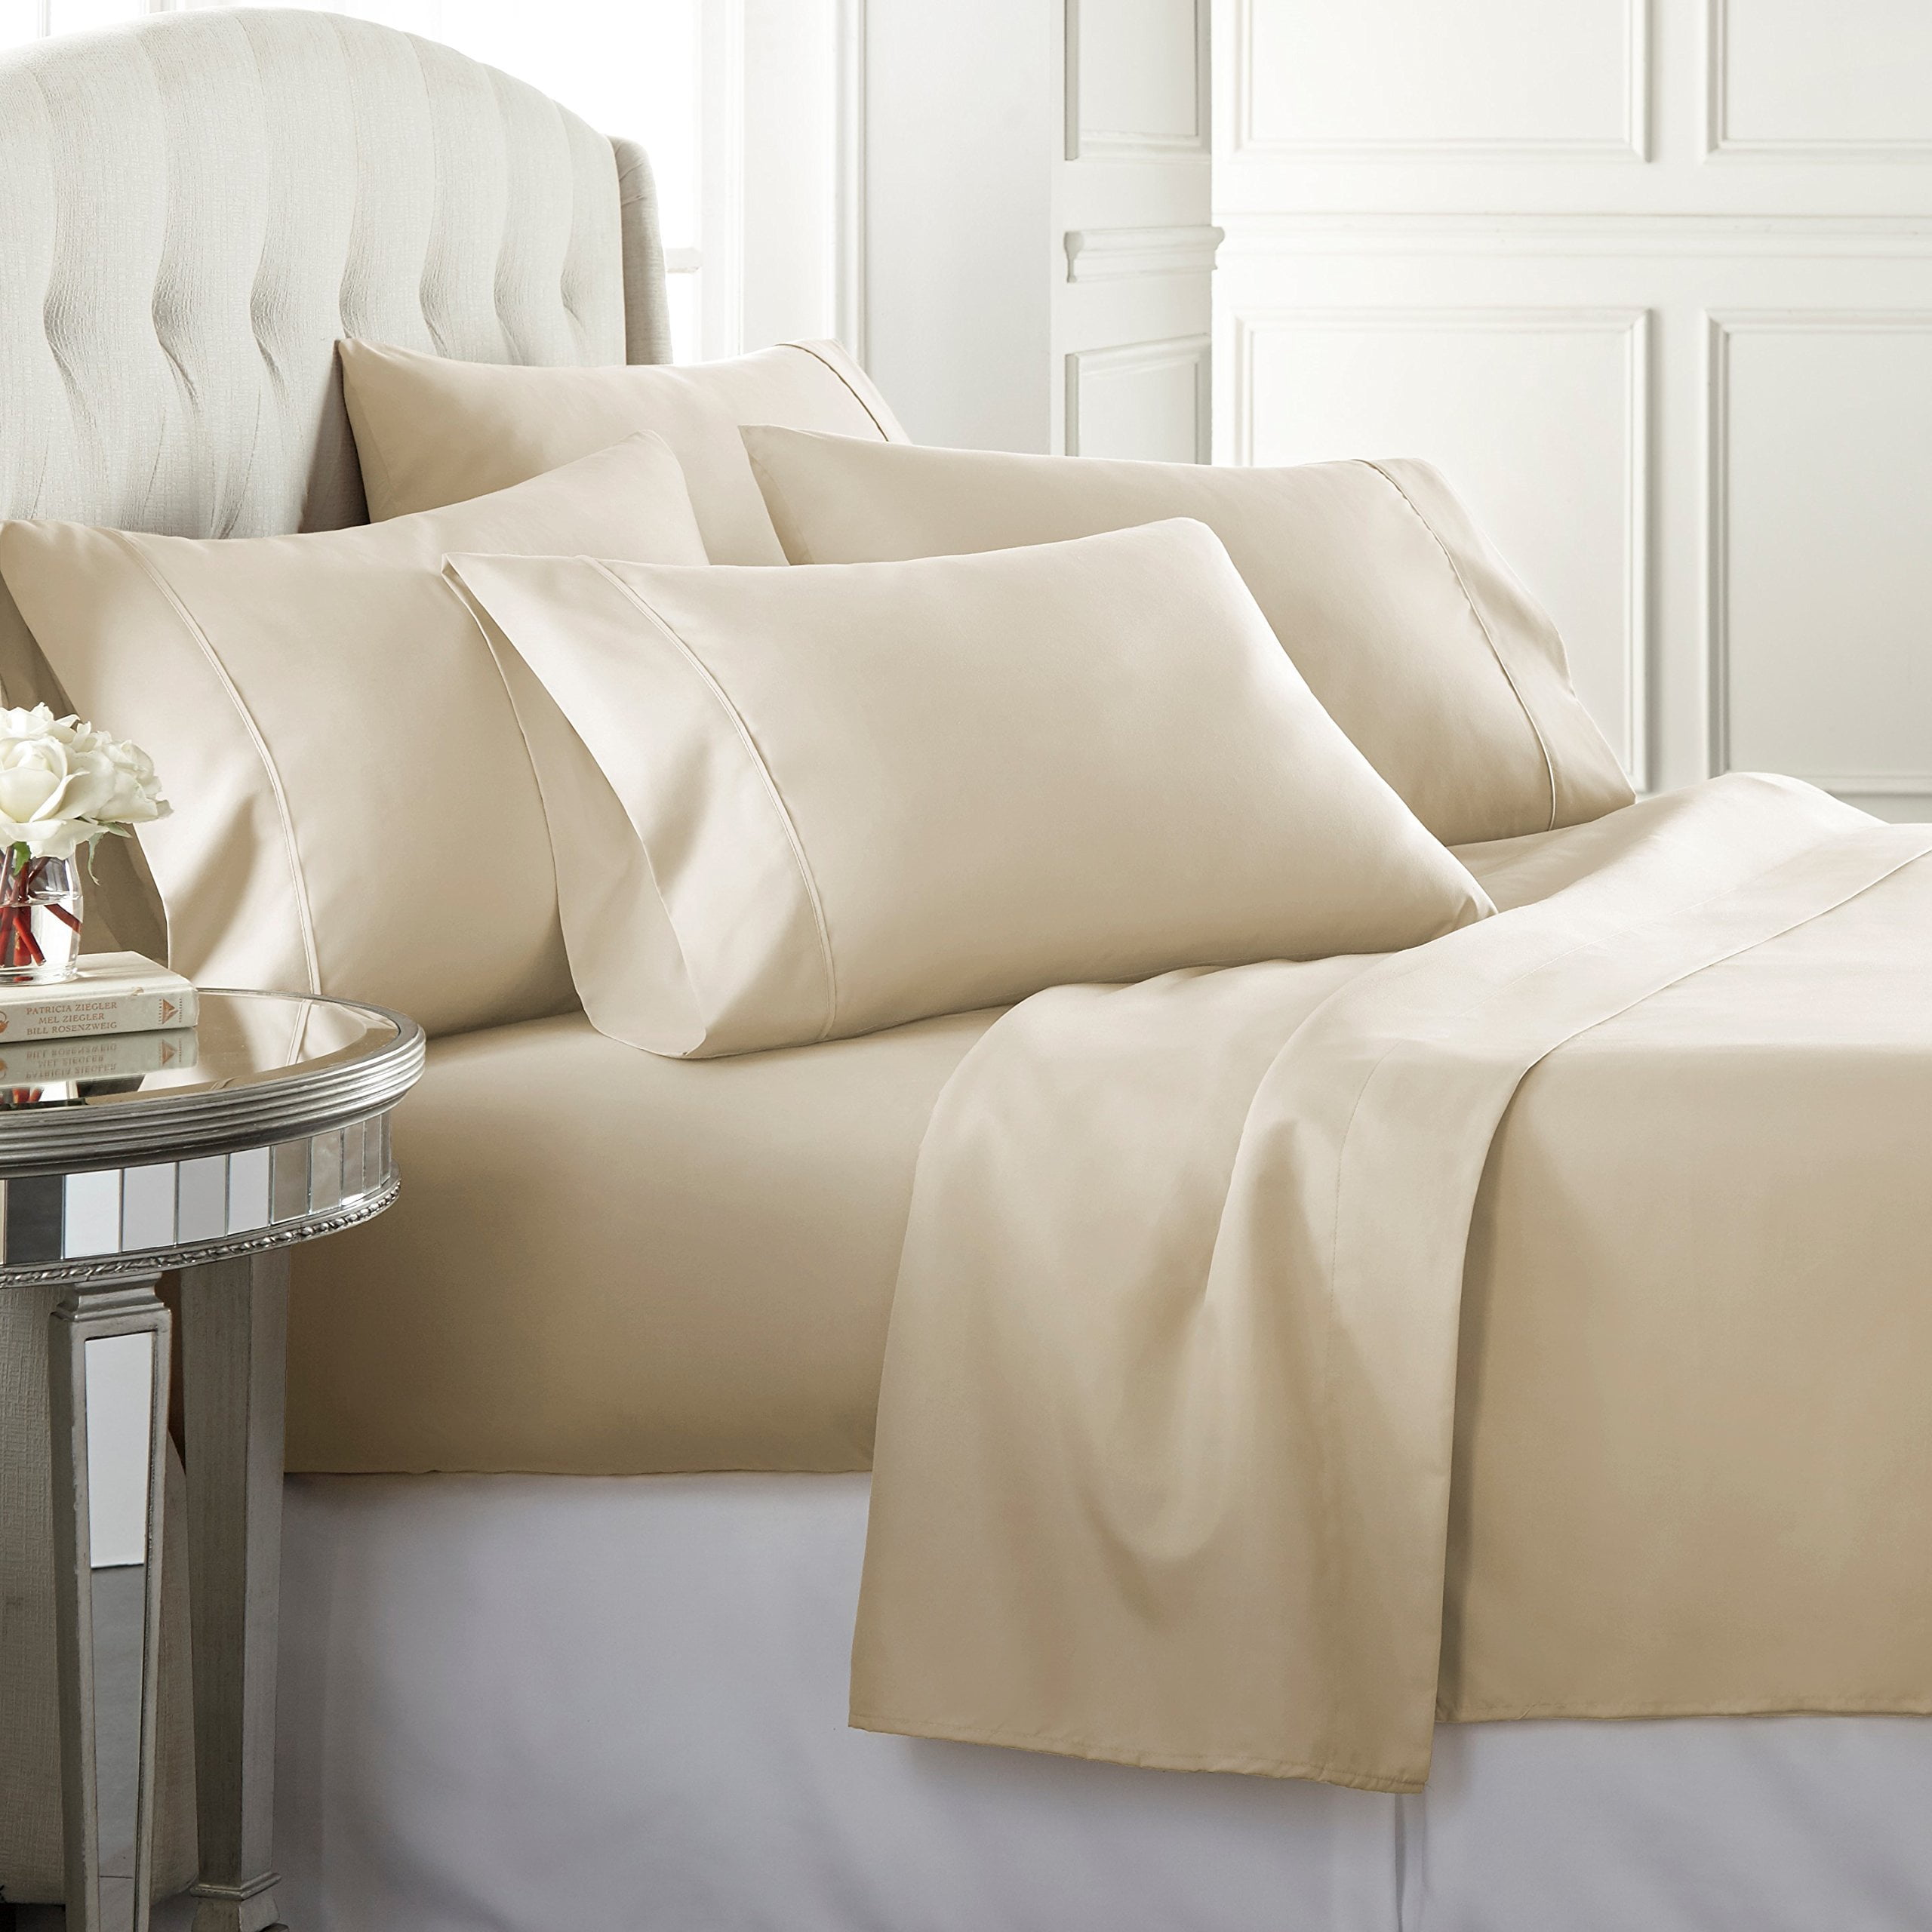 1800 Hotel Luxury Double Brushed Mic Details about   Italian Prestige Collection 4PC Sheet Set 